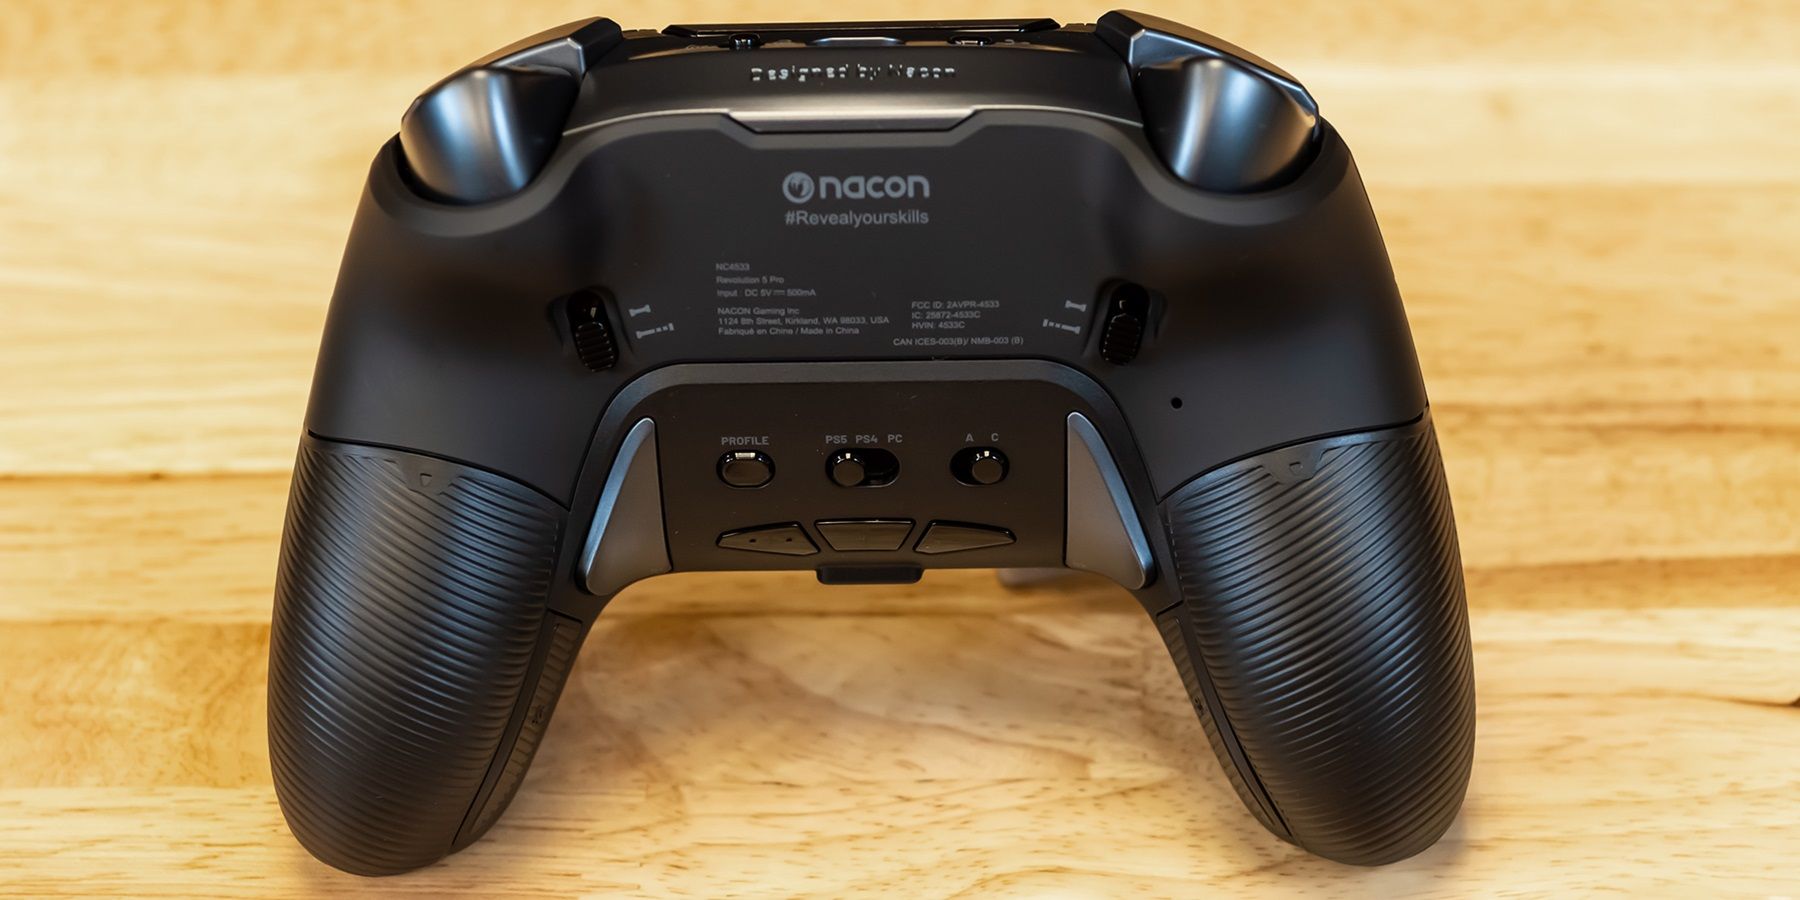 Up Your Game With The Nacon Revolution 5 Pro Controller This December